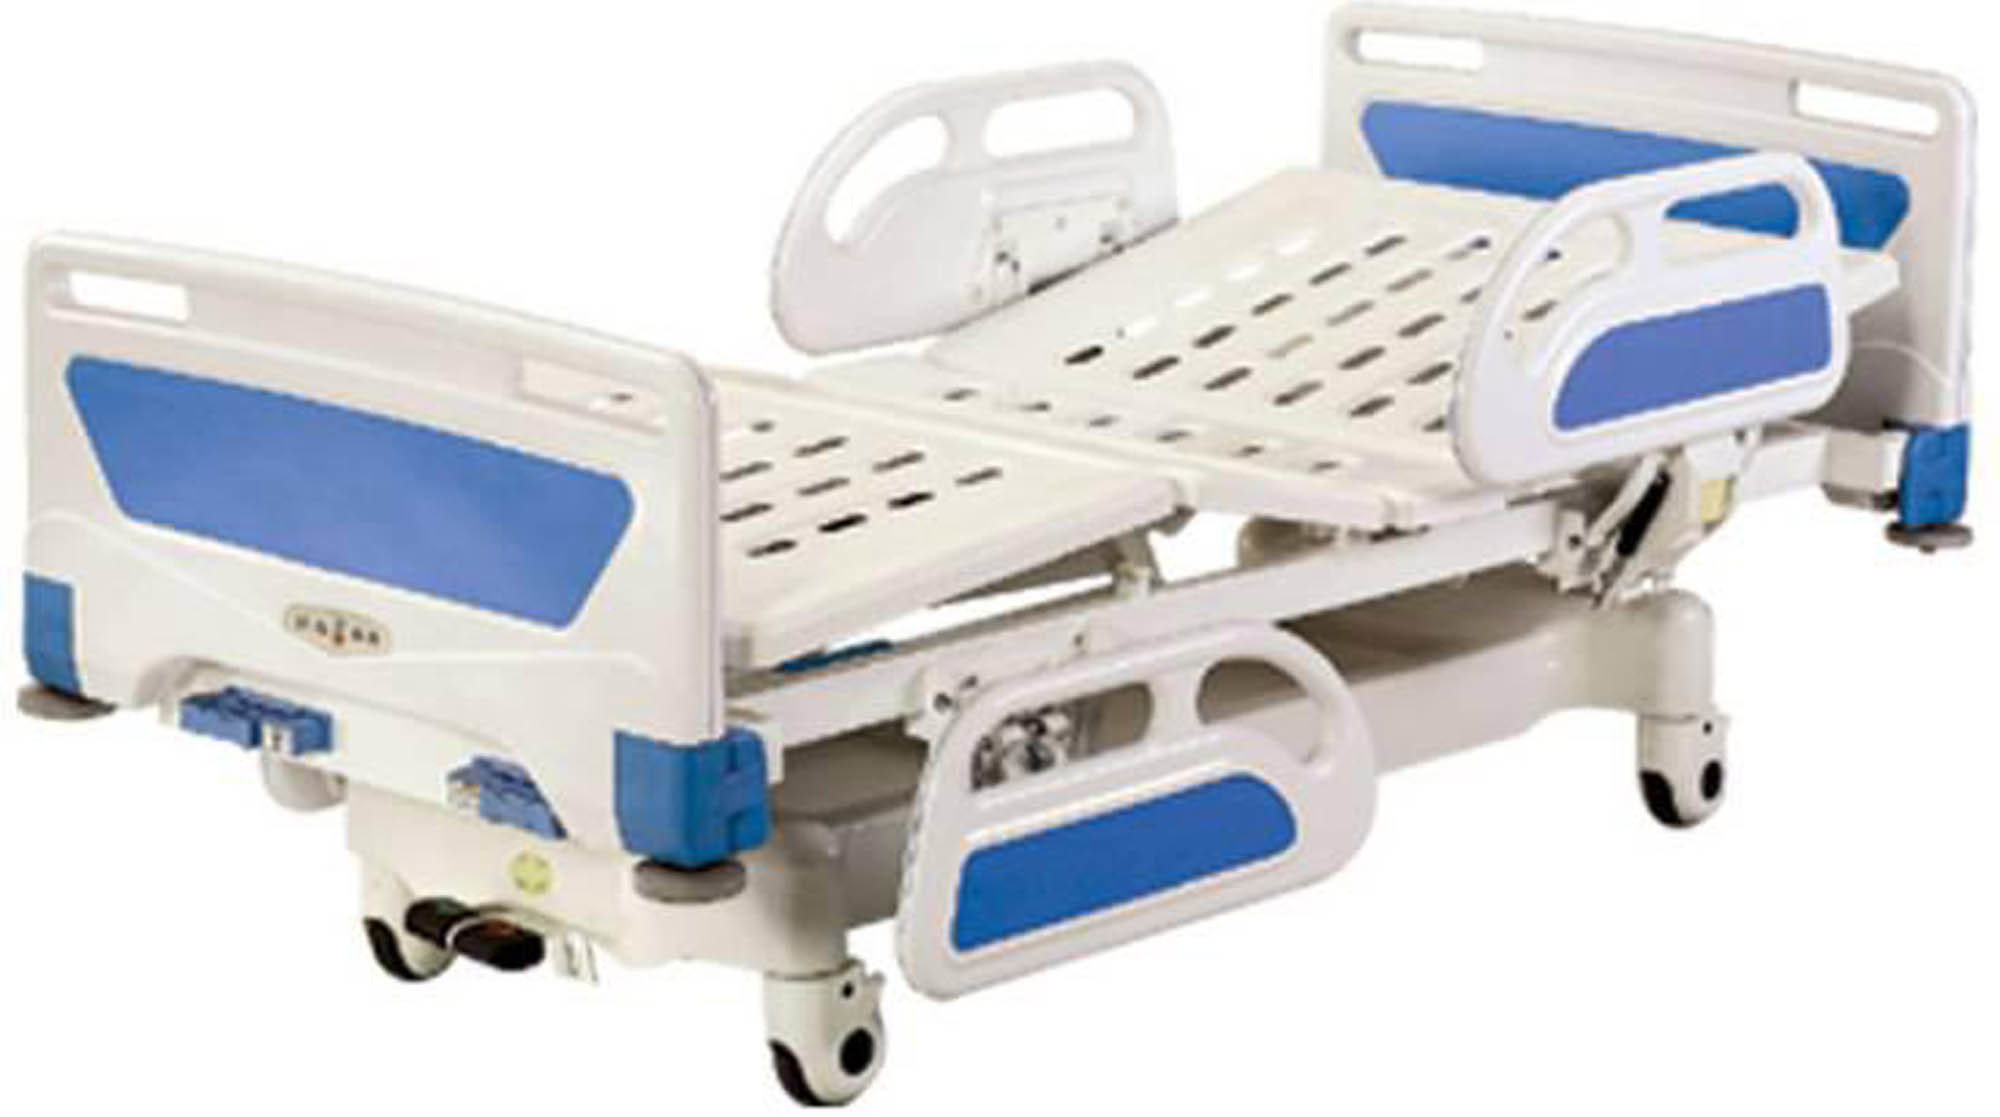 Central Locking Movable Full-Fowler Hospital Bed with ABS Head/Foot Board